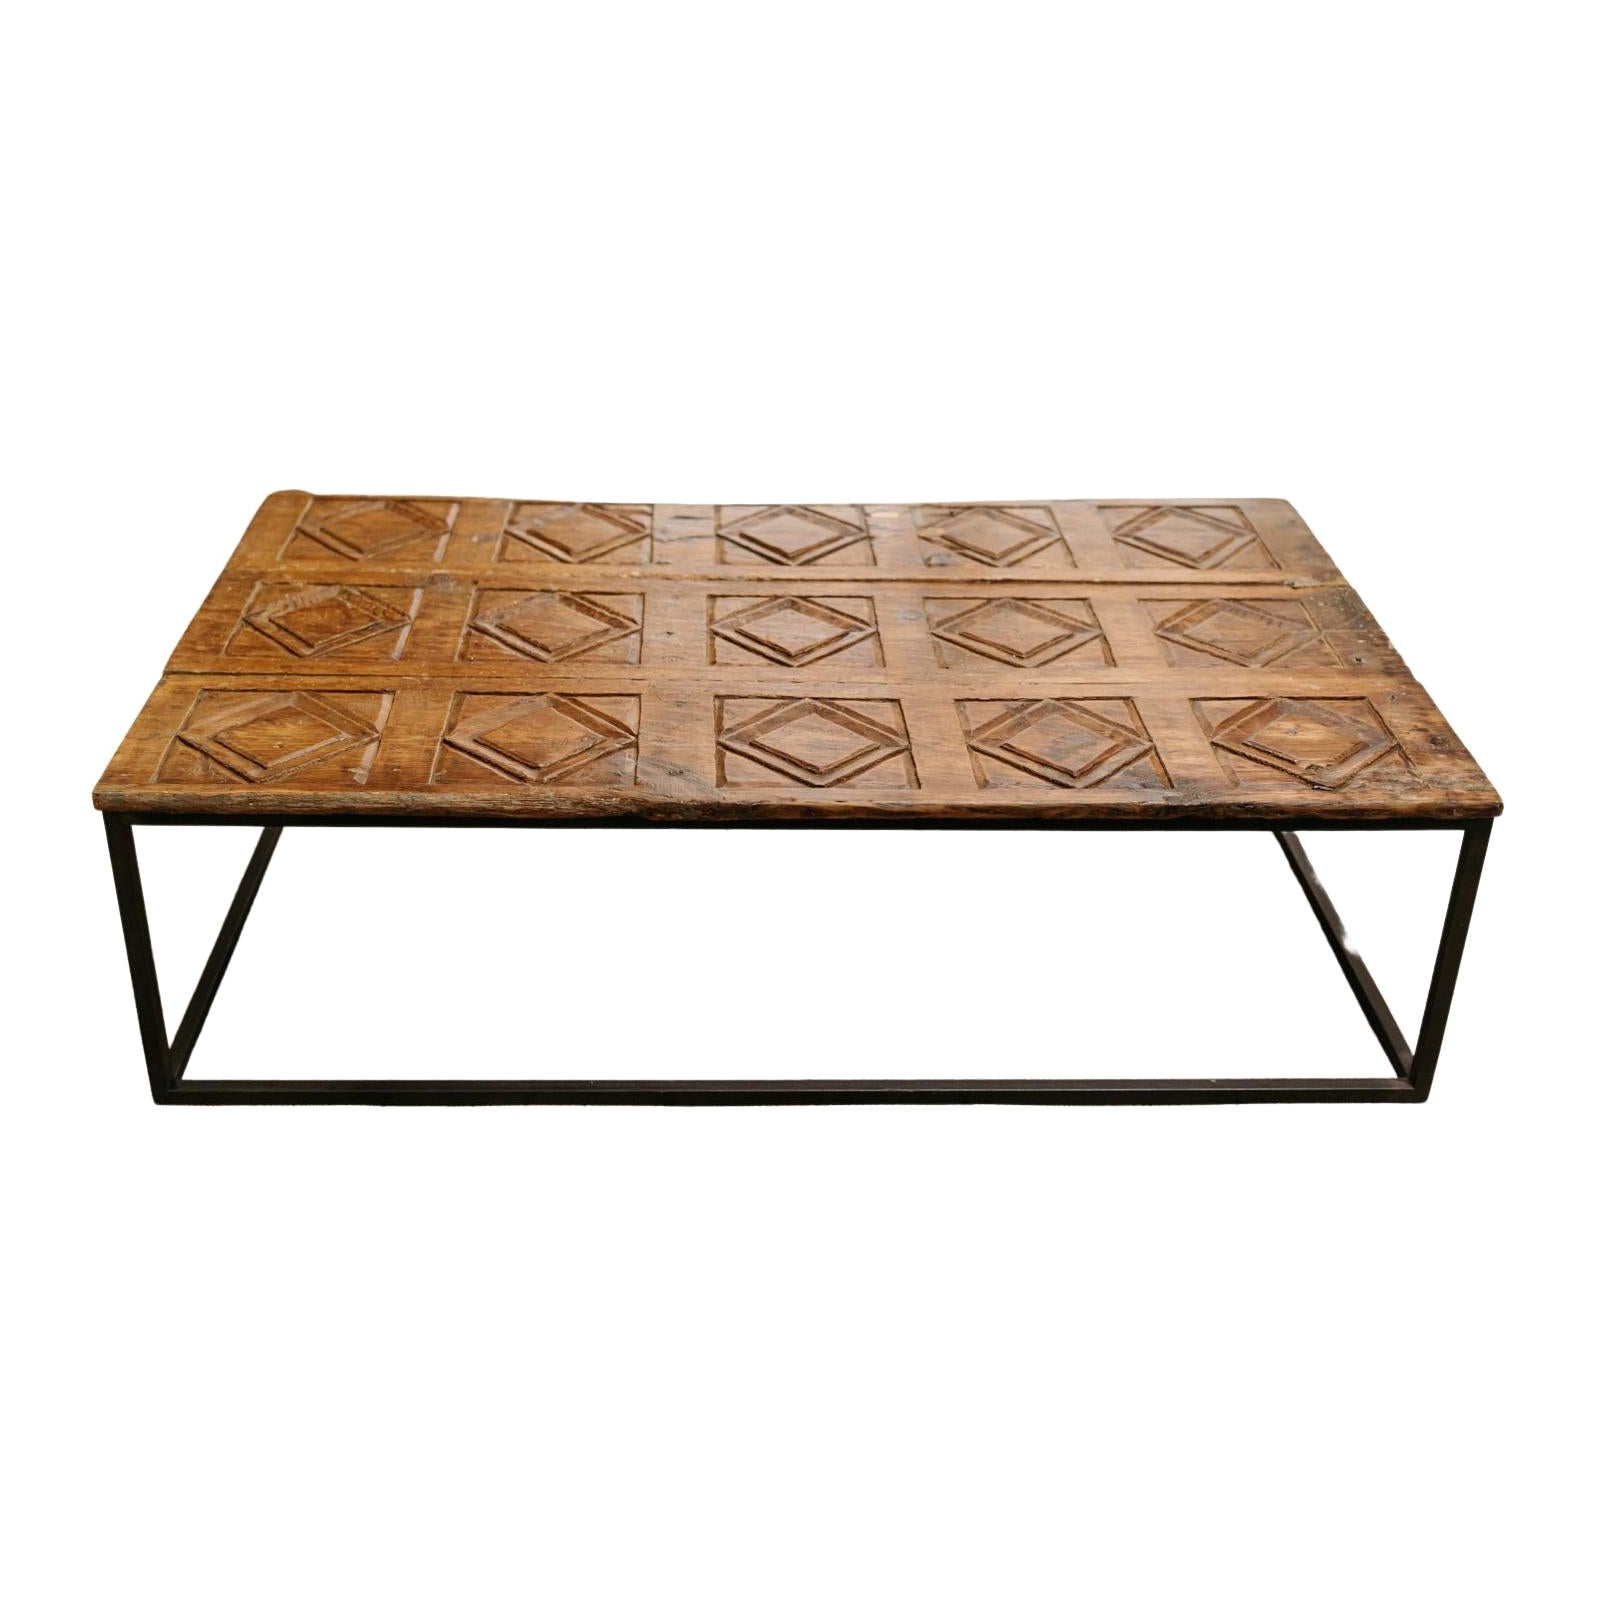 19th century Spanish door, now made into a coffee table, contemporary iron base 